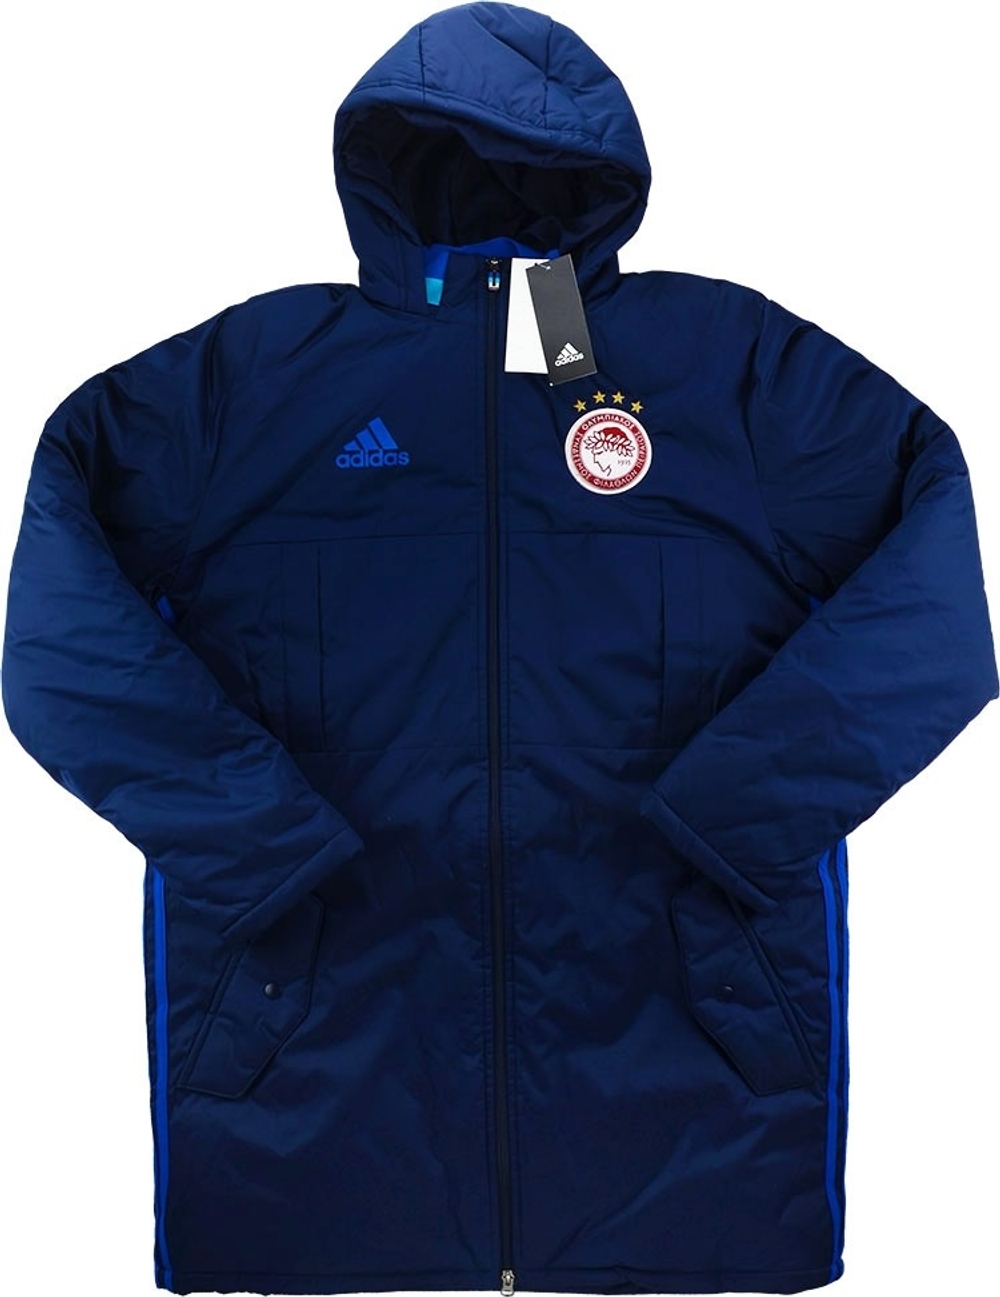 2016-17 Olympiakos Adidas Padded Jacket *BNIB* XS- Greek Clubs Jackets & Tracksuits Featured Products View All Clearance Training Olympiakos Best Sellers Adidas Clearance